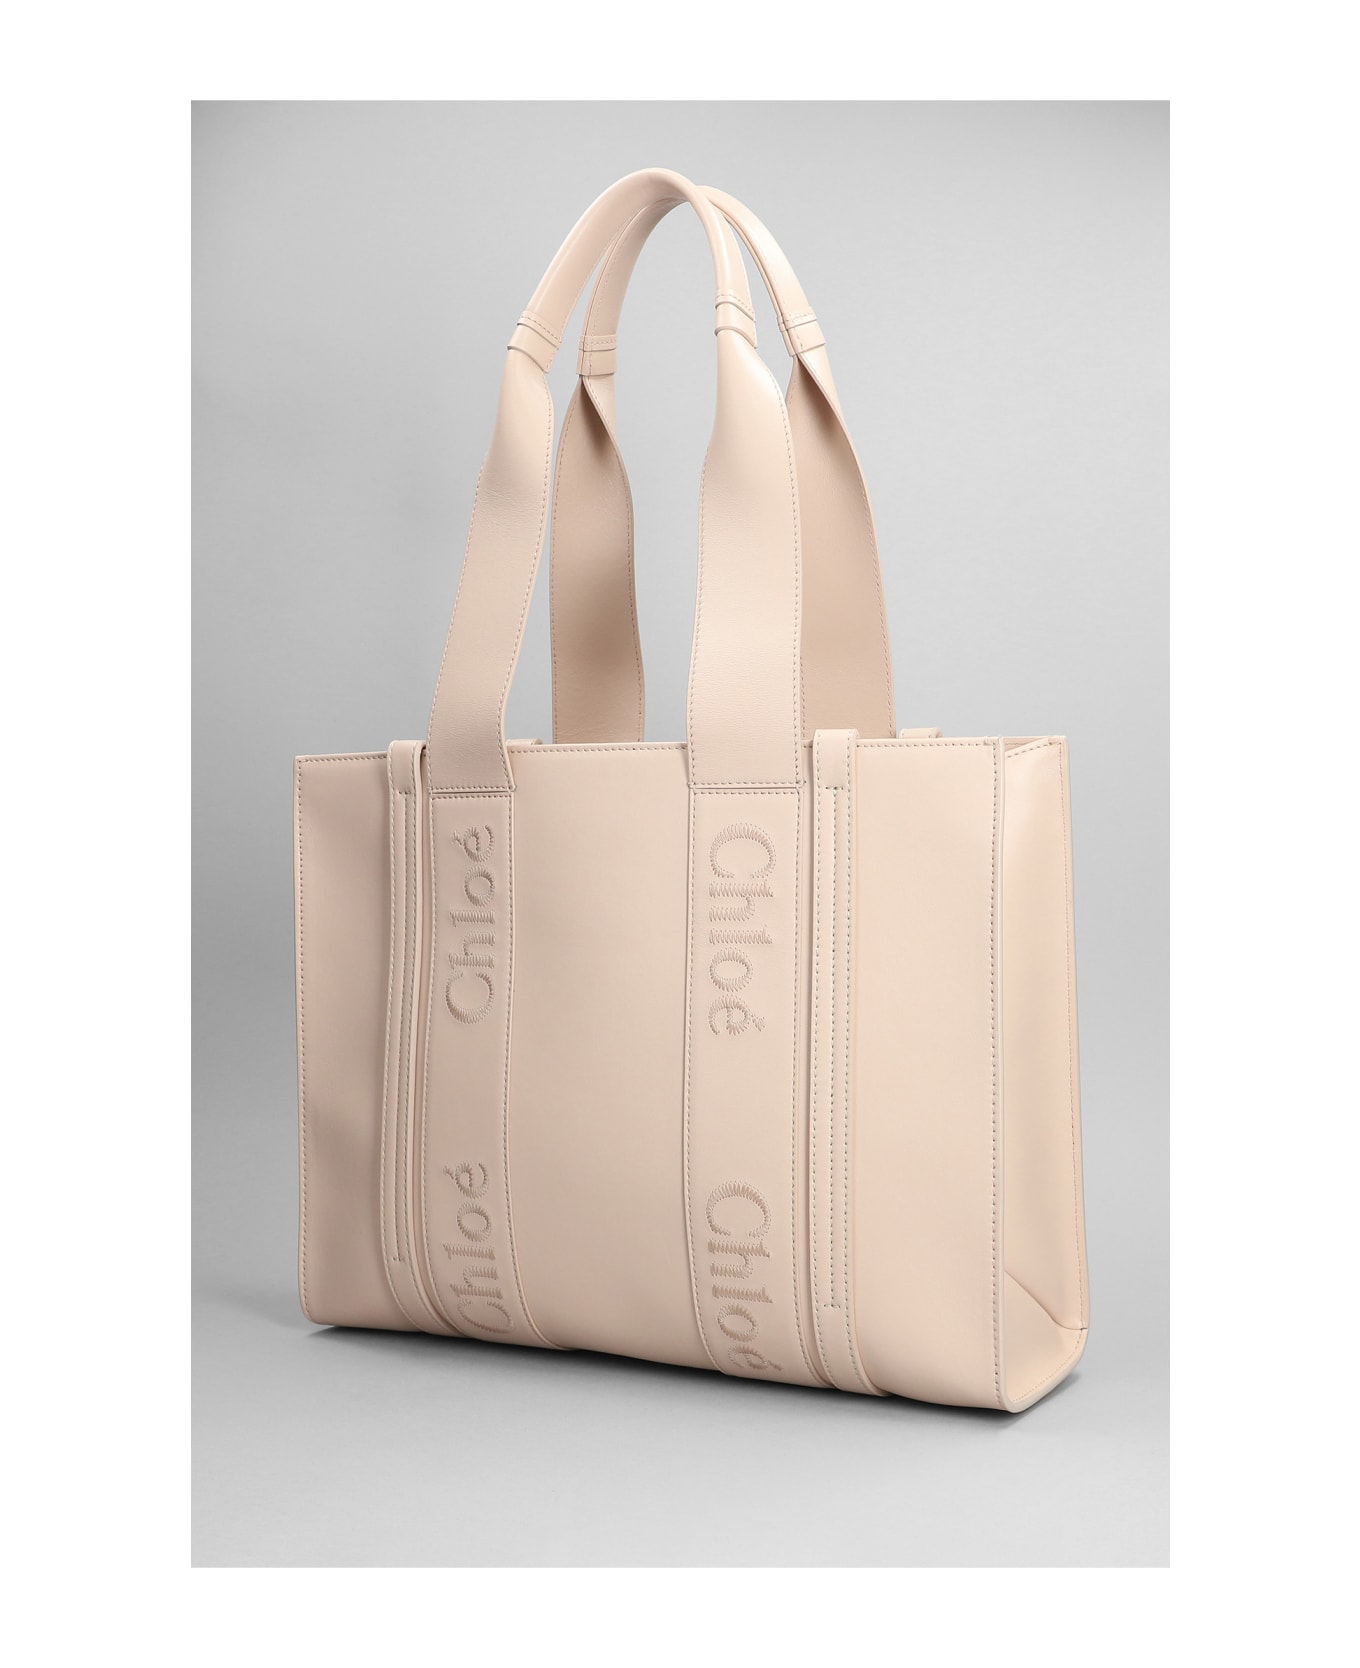 Chloé Woody Medium Leather Tote Bag - rose-pink トートバッグ